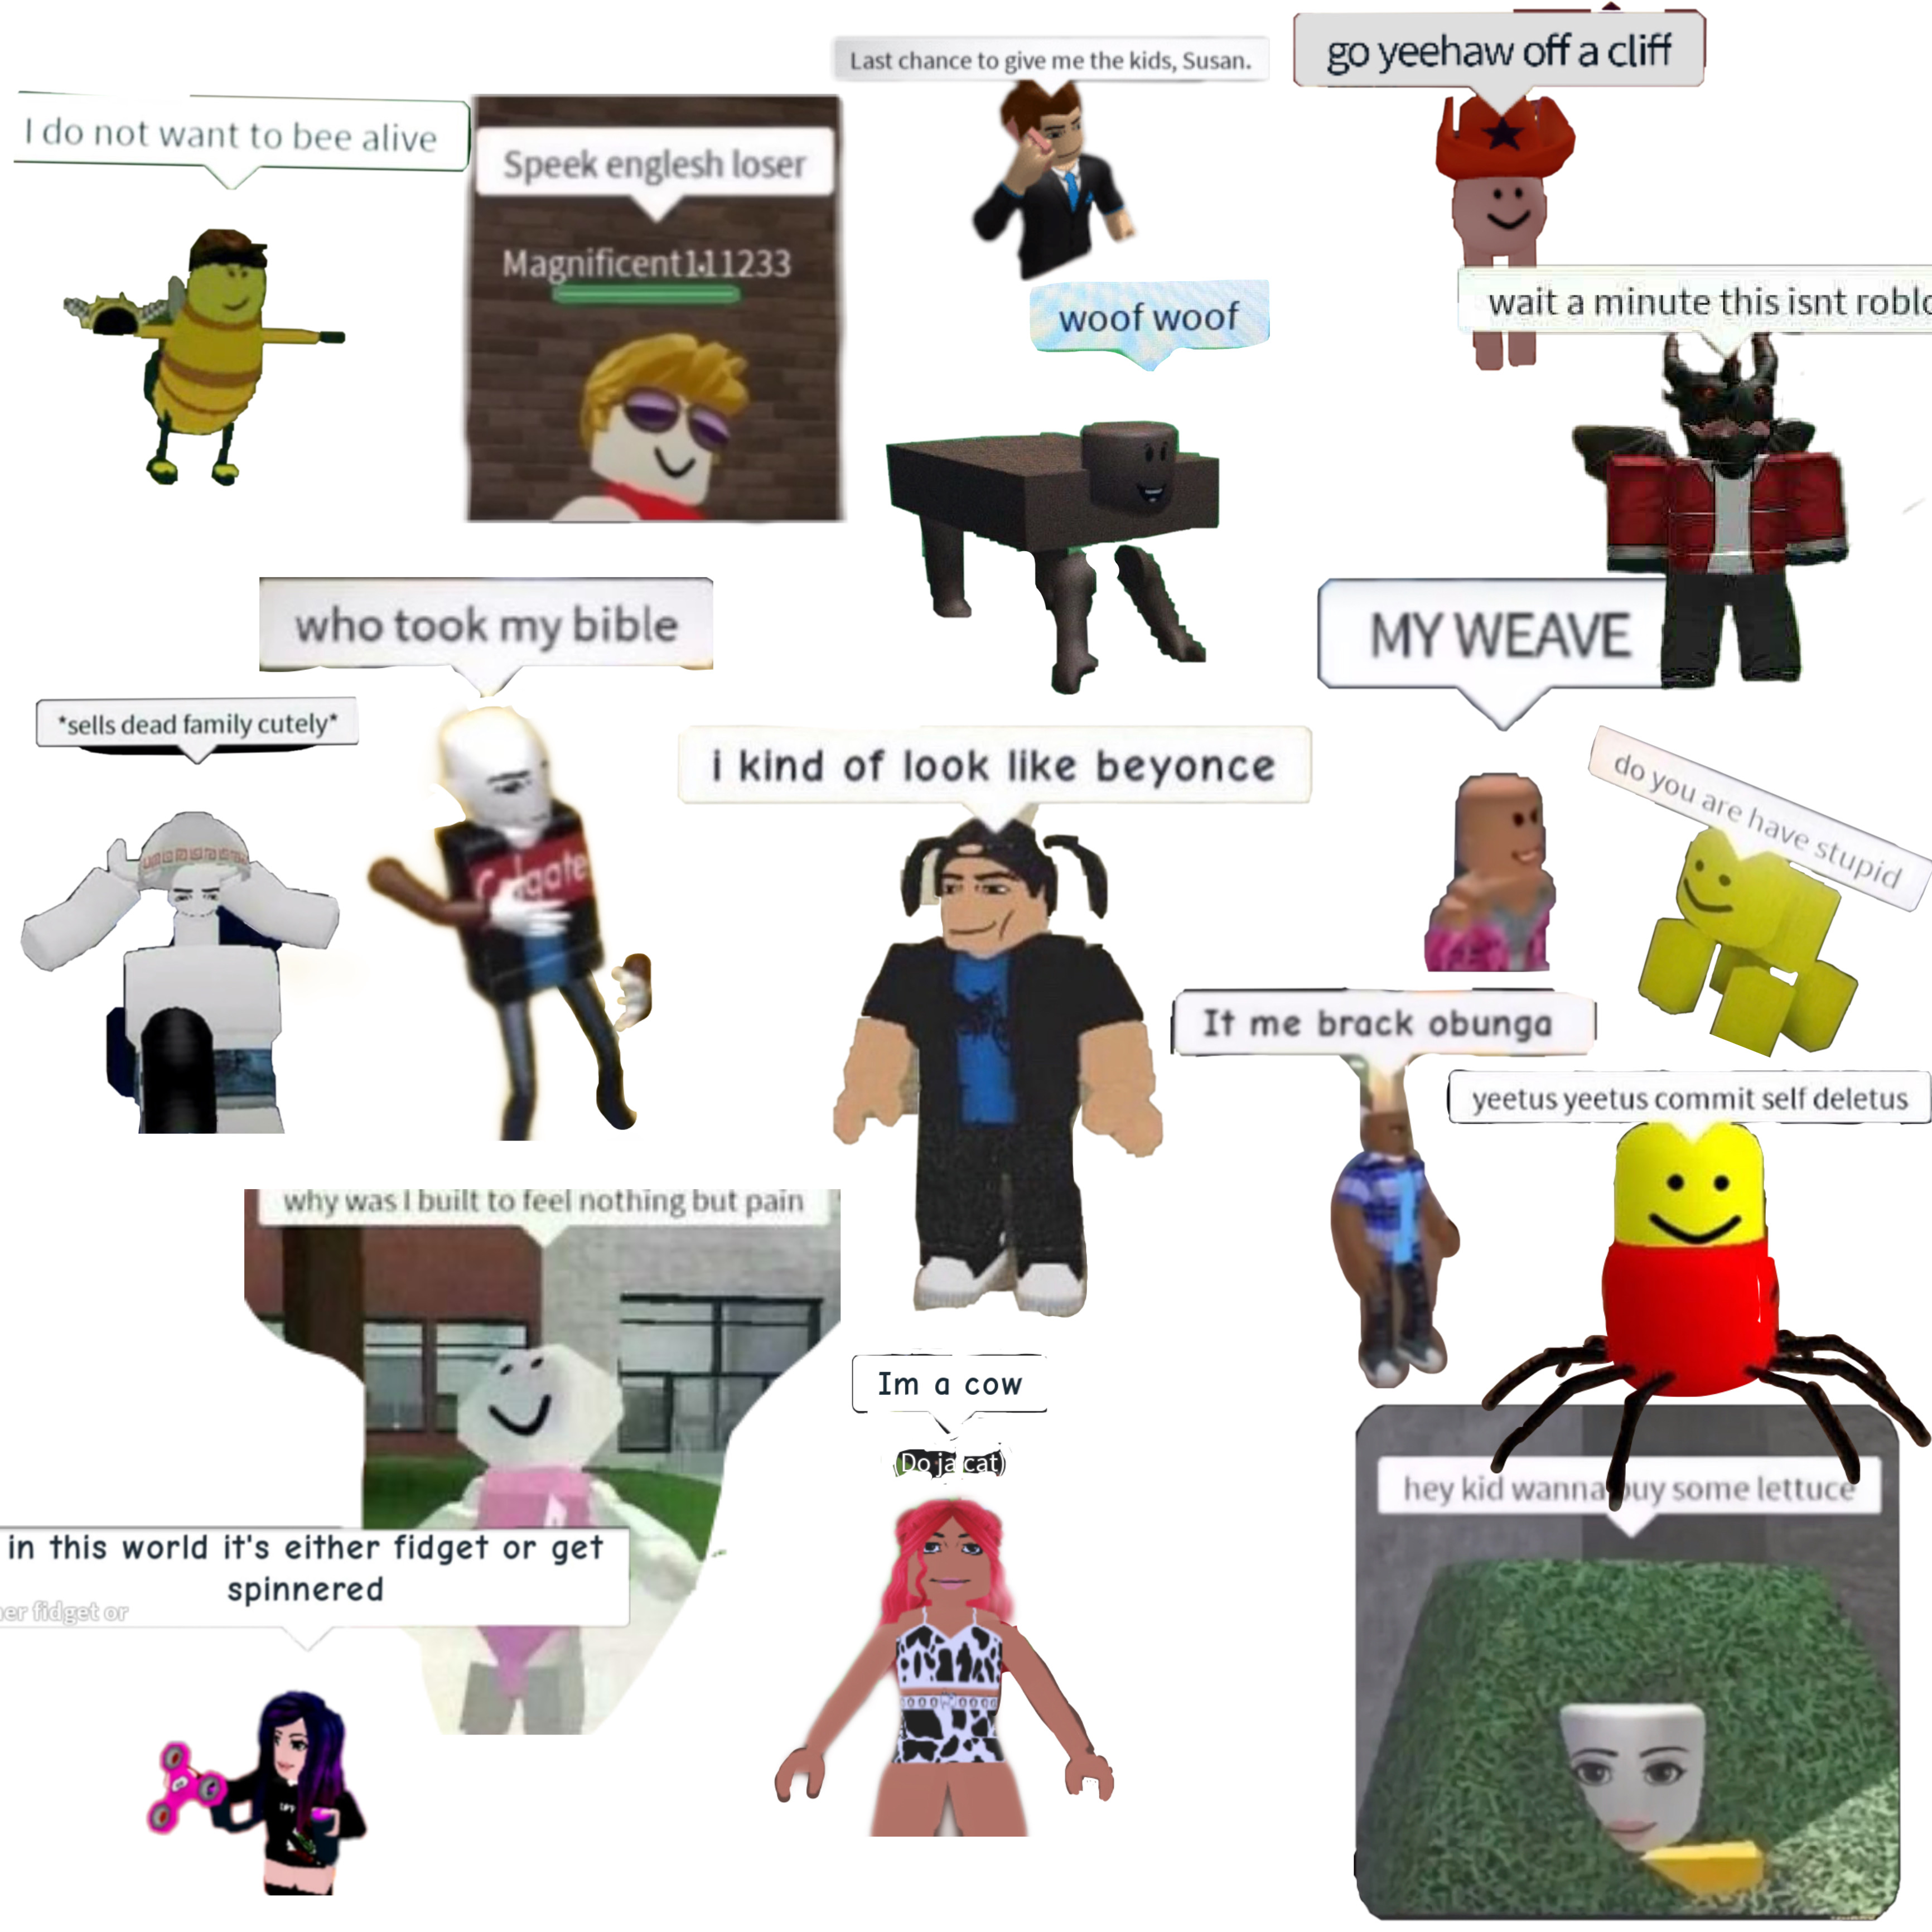 Roblox Meme Image By 𝗹𝗼𝘃𝗲 𝘆𝗮 𝗮𝗹𝗹 - roblox cursedchats sticker by perfectdanu2010yt xd